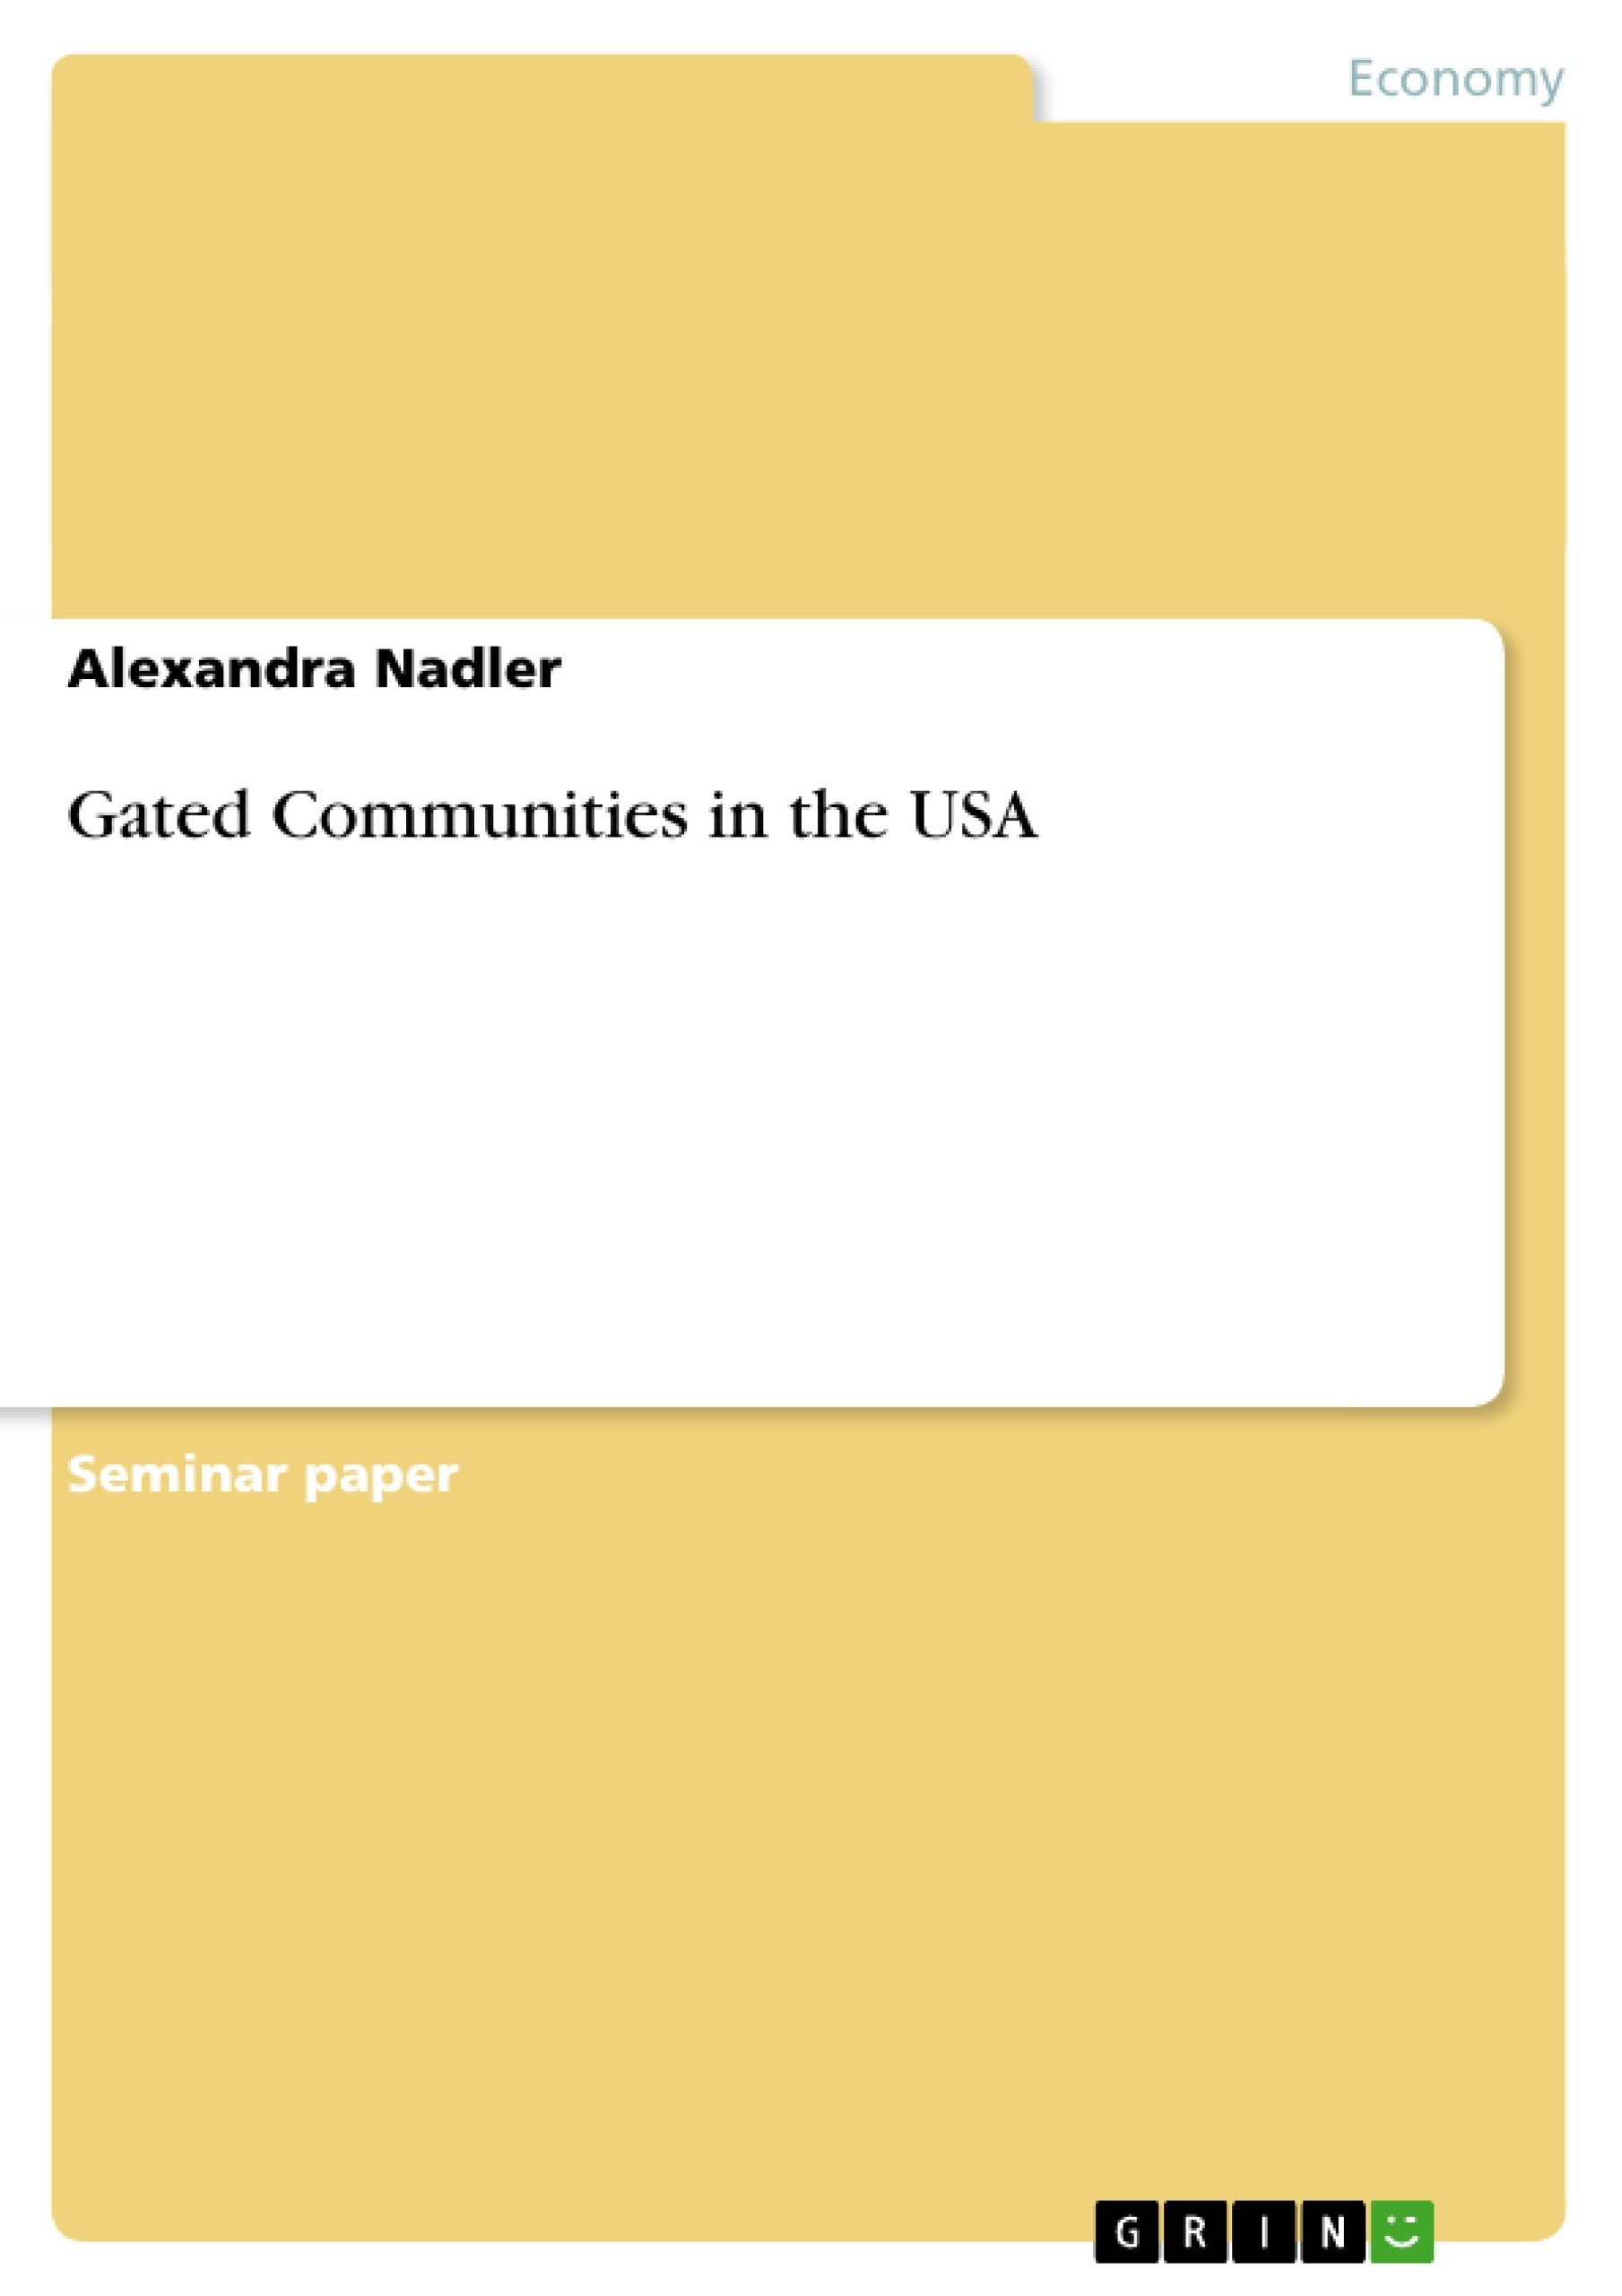 Title: Gated Communities in the USA